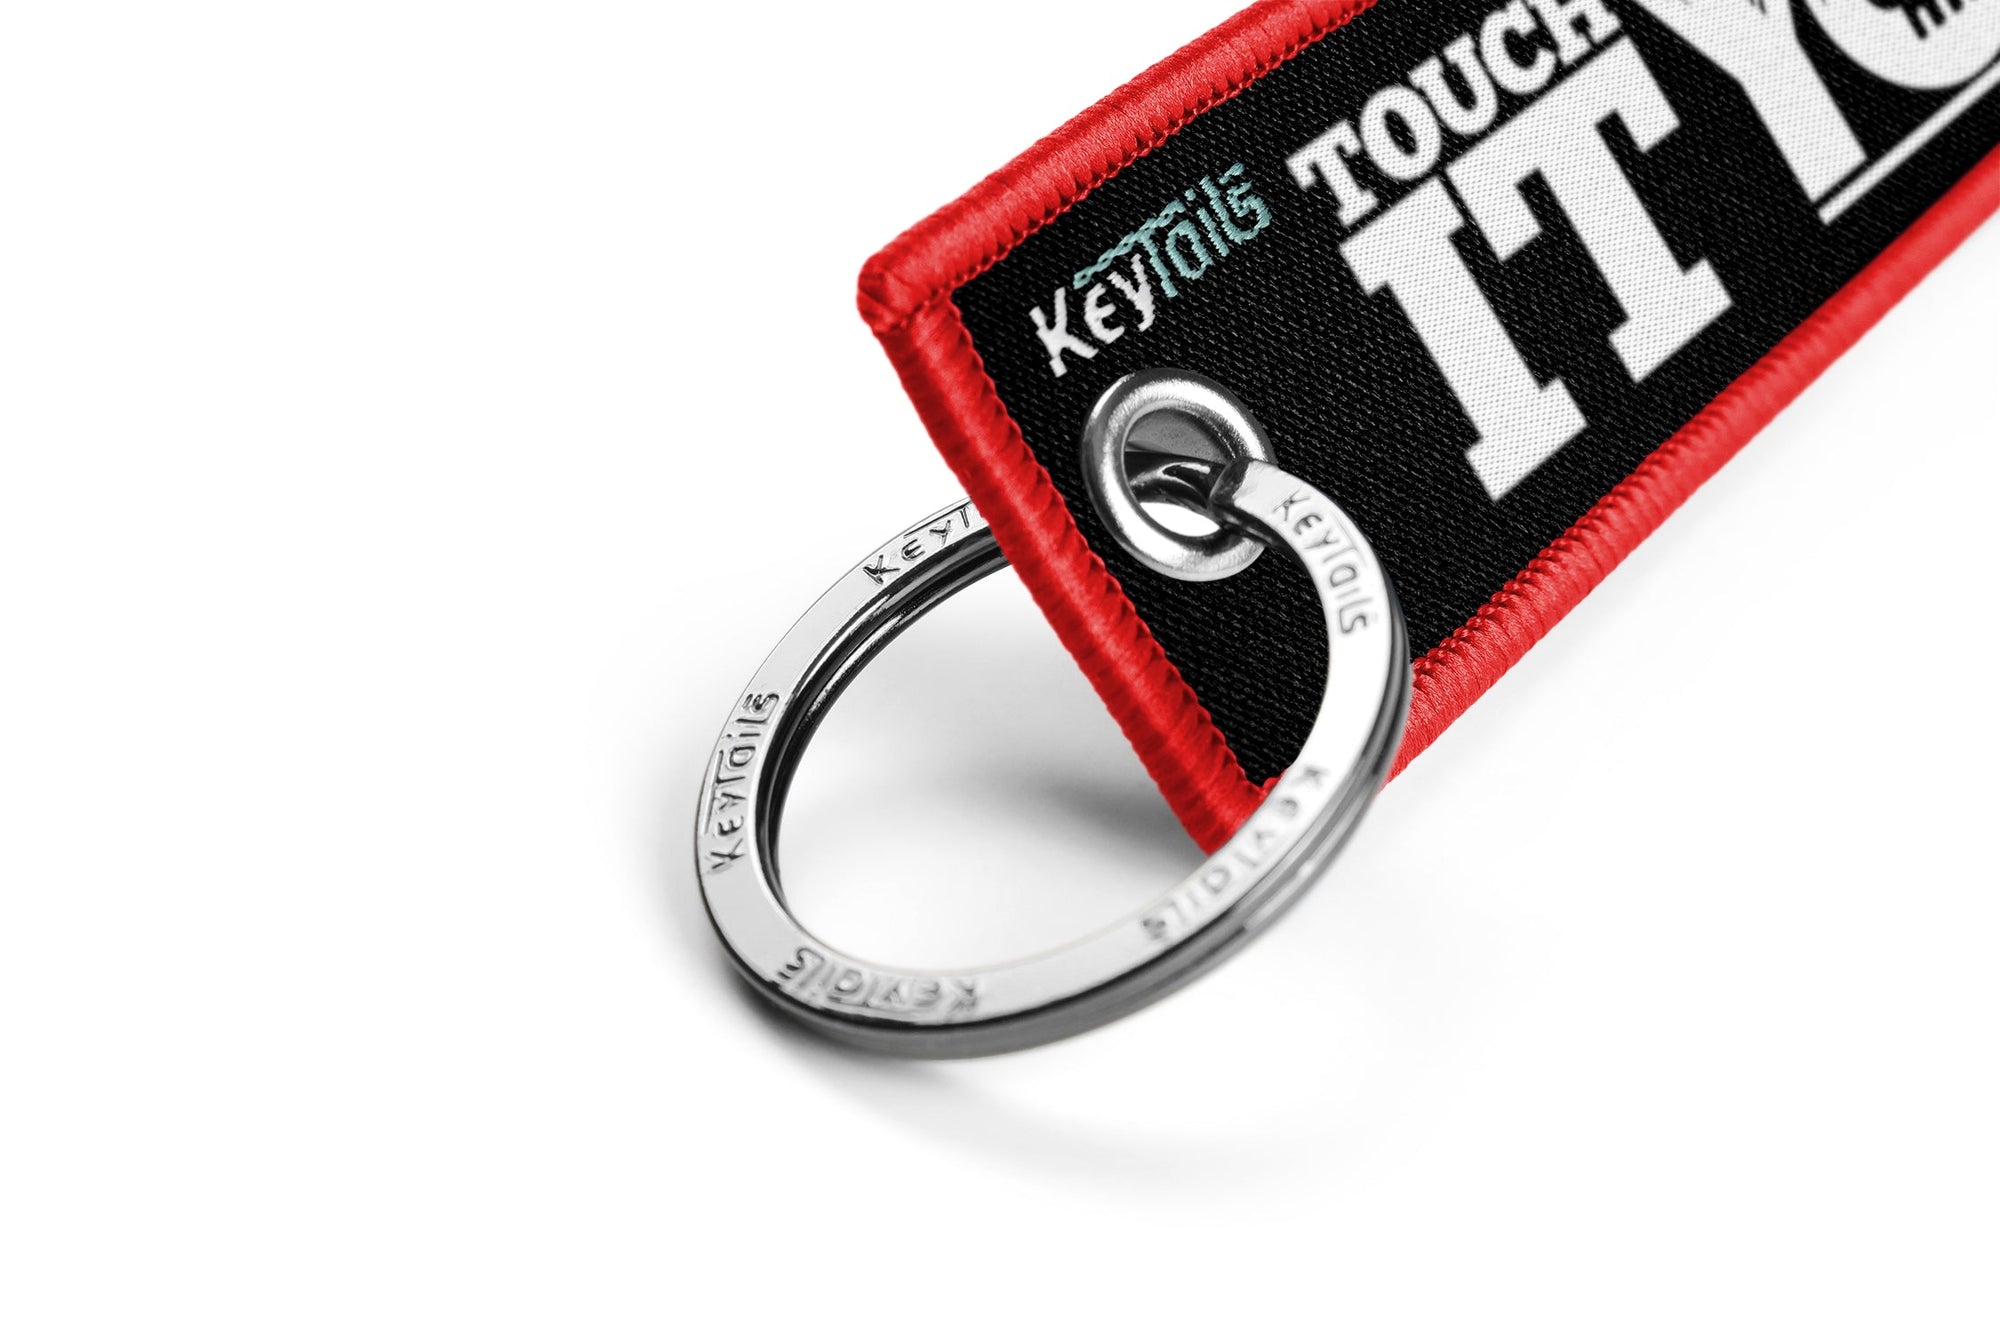 Touch It You Die Keychain, Key Tag - Red